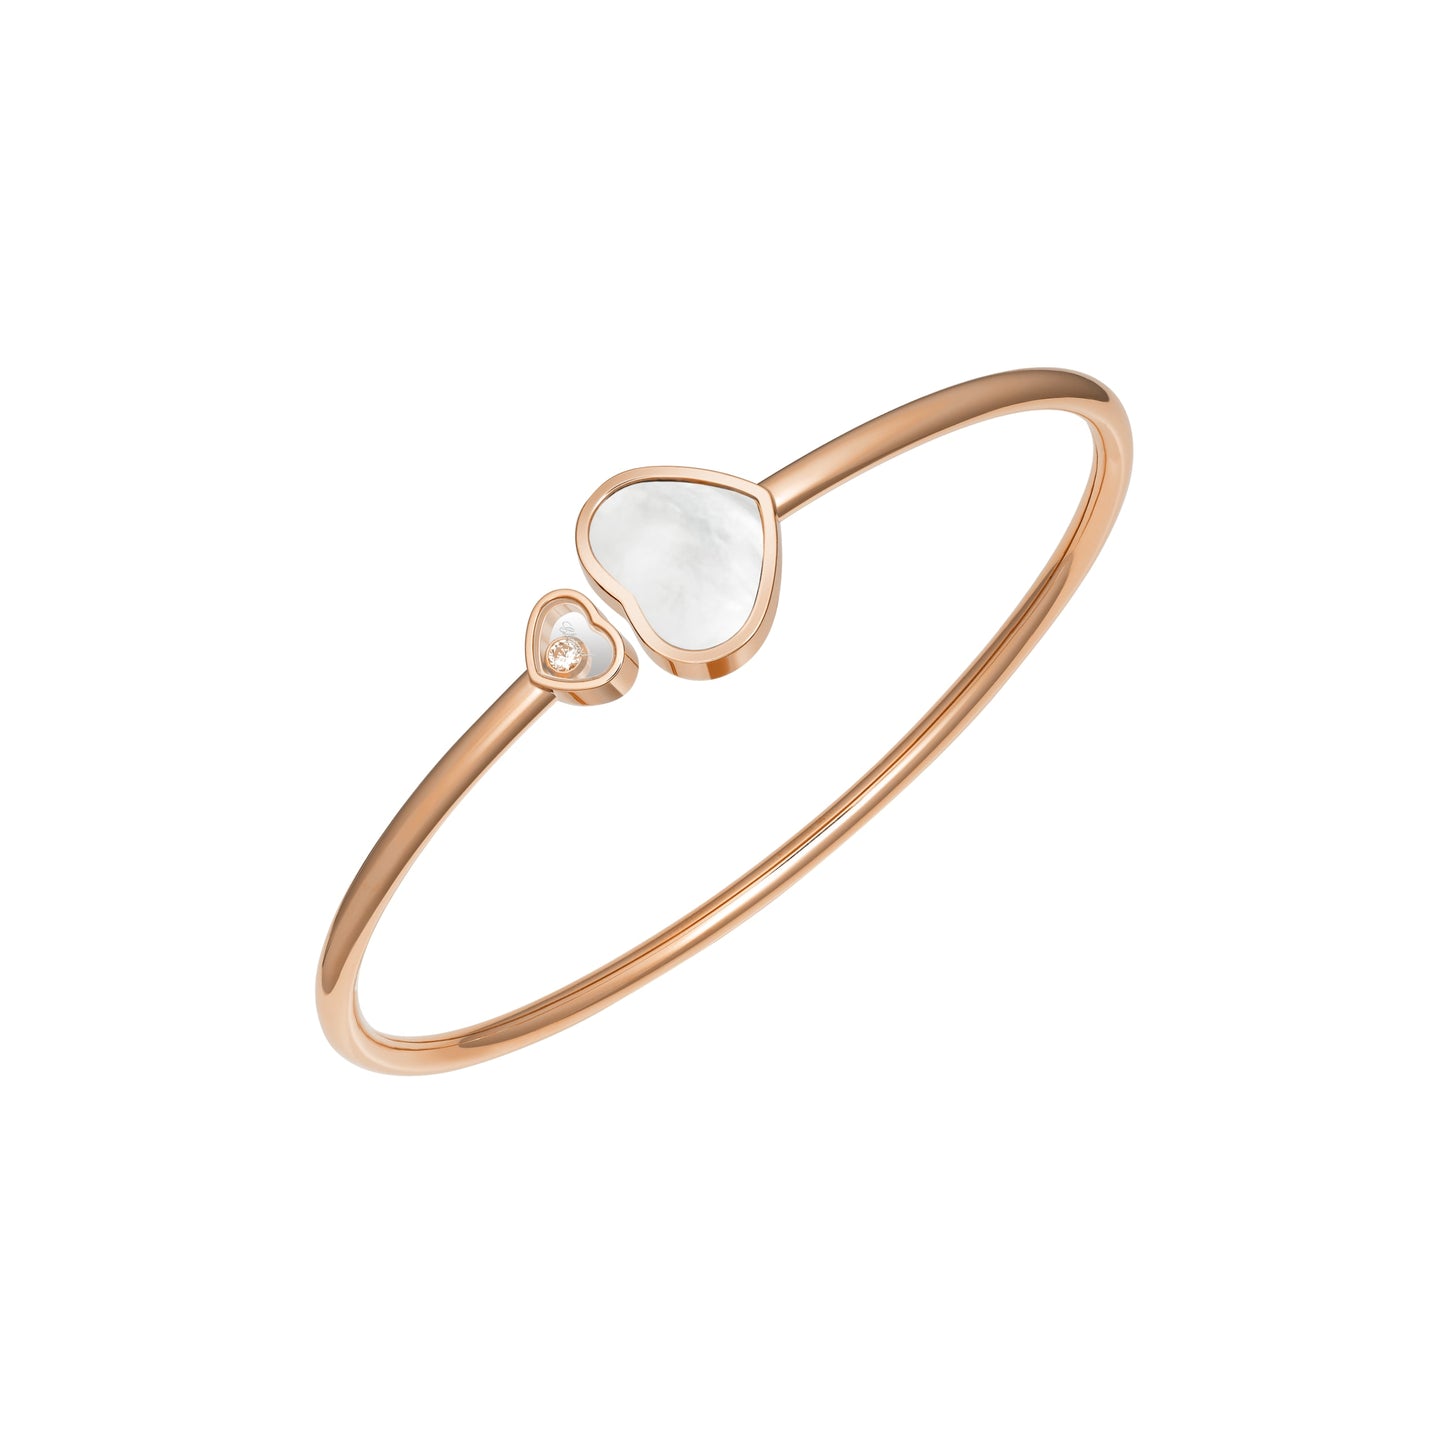 HAPPY HEARTS BANGLE, ETHICAL ROSE GOLD, DIAMOND, MOTHER-OF-PEARL 857482-5300